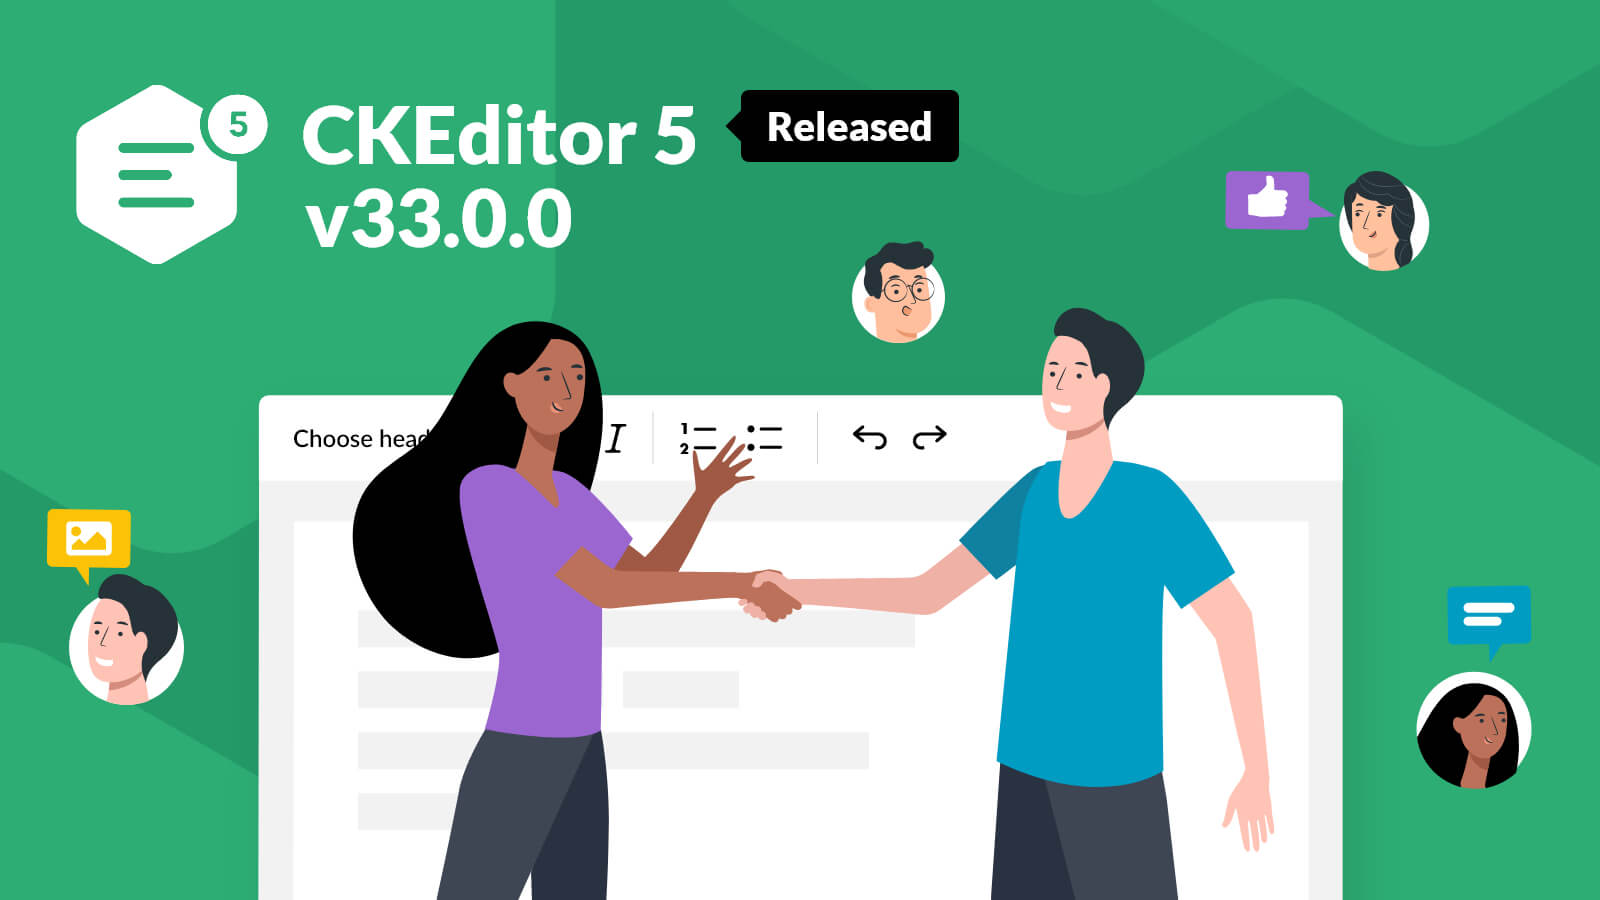 CKEditor 5 v33.0.0 with improved conversion system and DLL builds for collaboration features